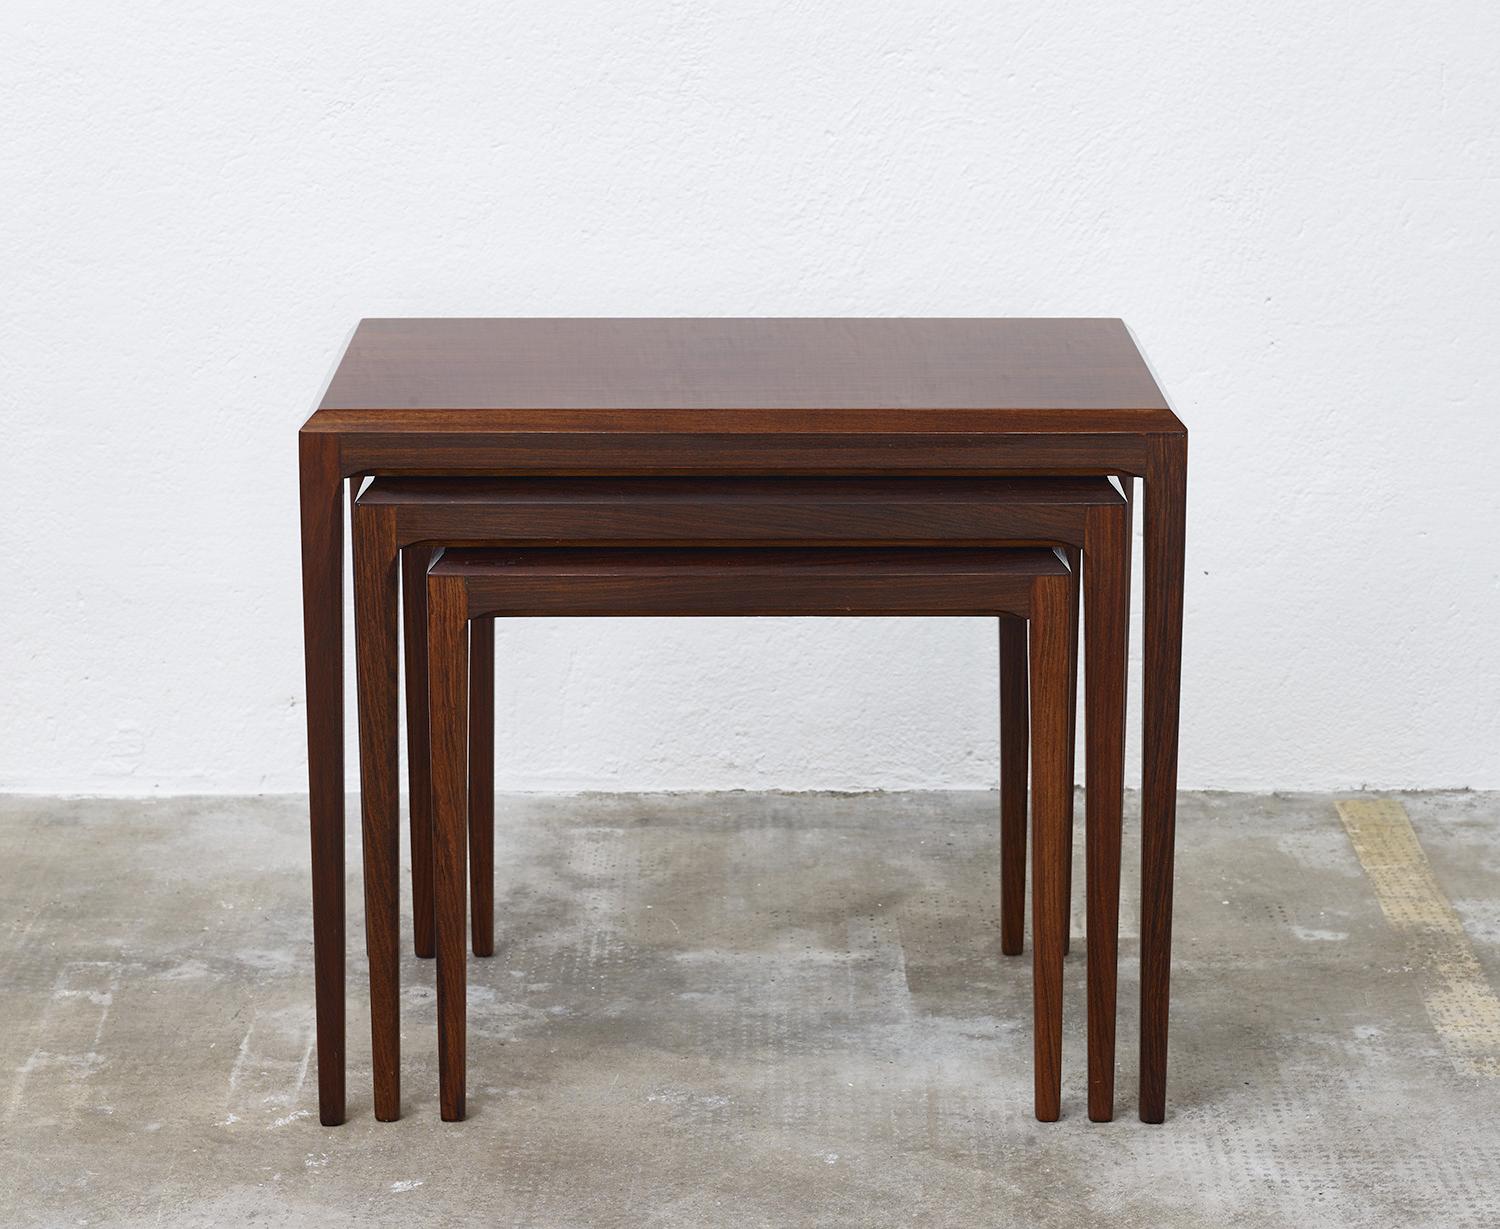 Set of rosewood nesting tables by Johannes Andersen for CFC Silkeborg, Denmark.

Beautiful set of rosewood nesting tables by Danish designer Johannes Andersen for CHF Silkeborg, circa 1960.

The refined details as well as the sleek legs make